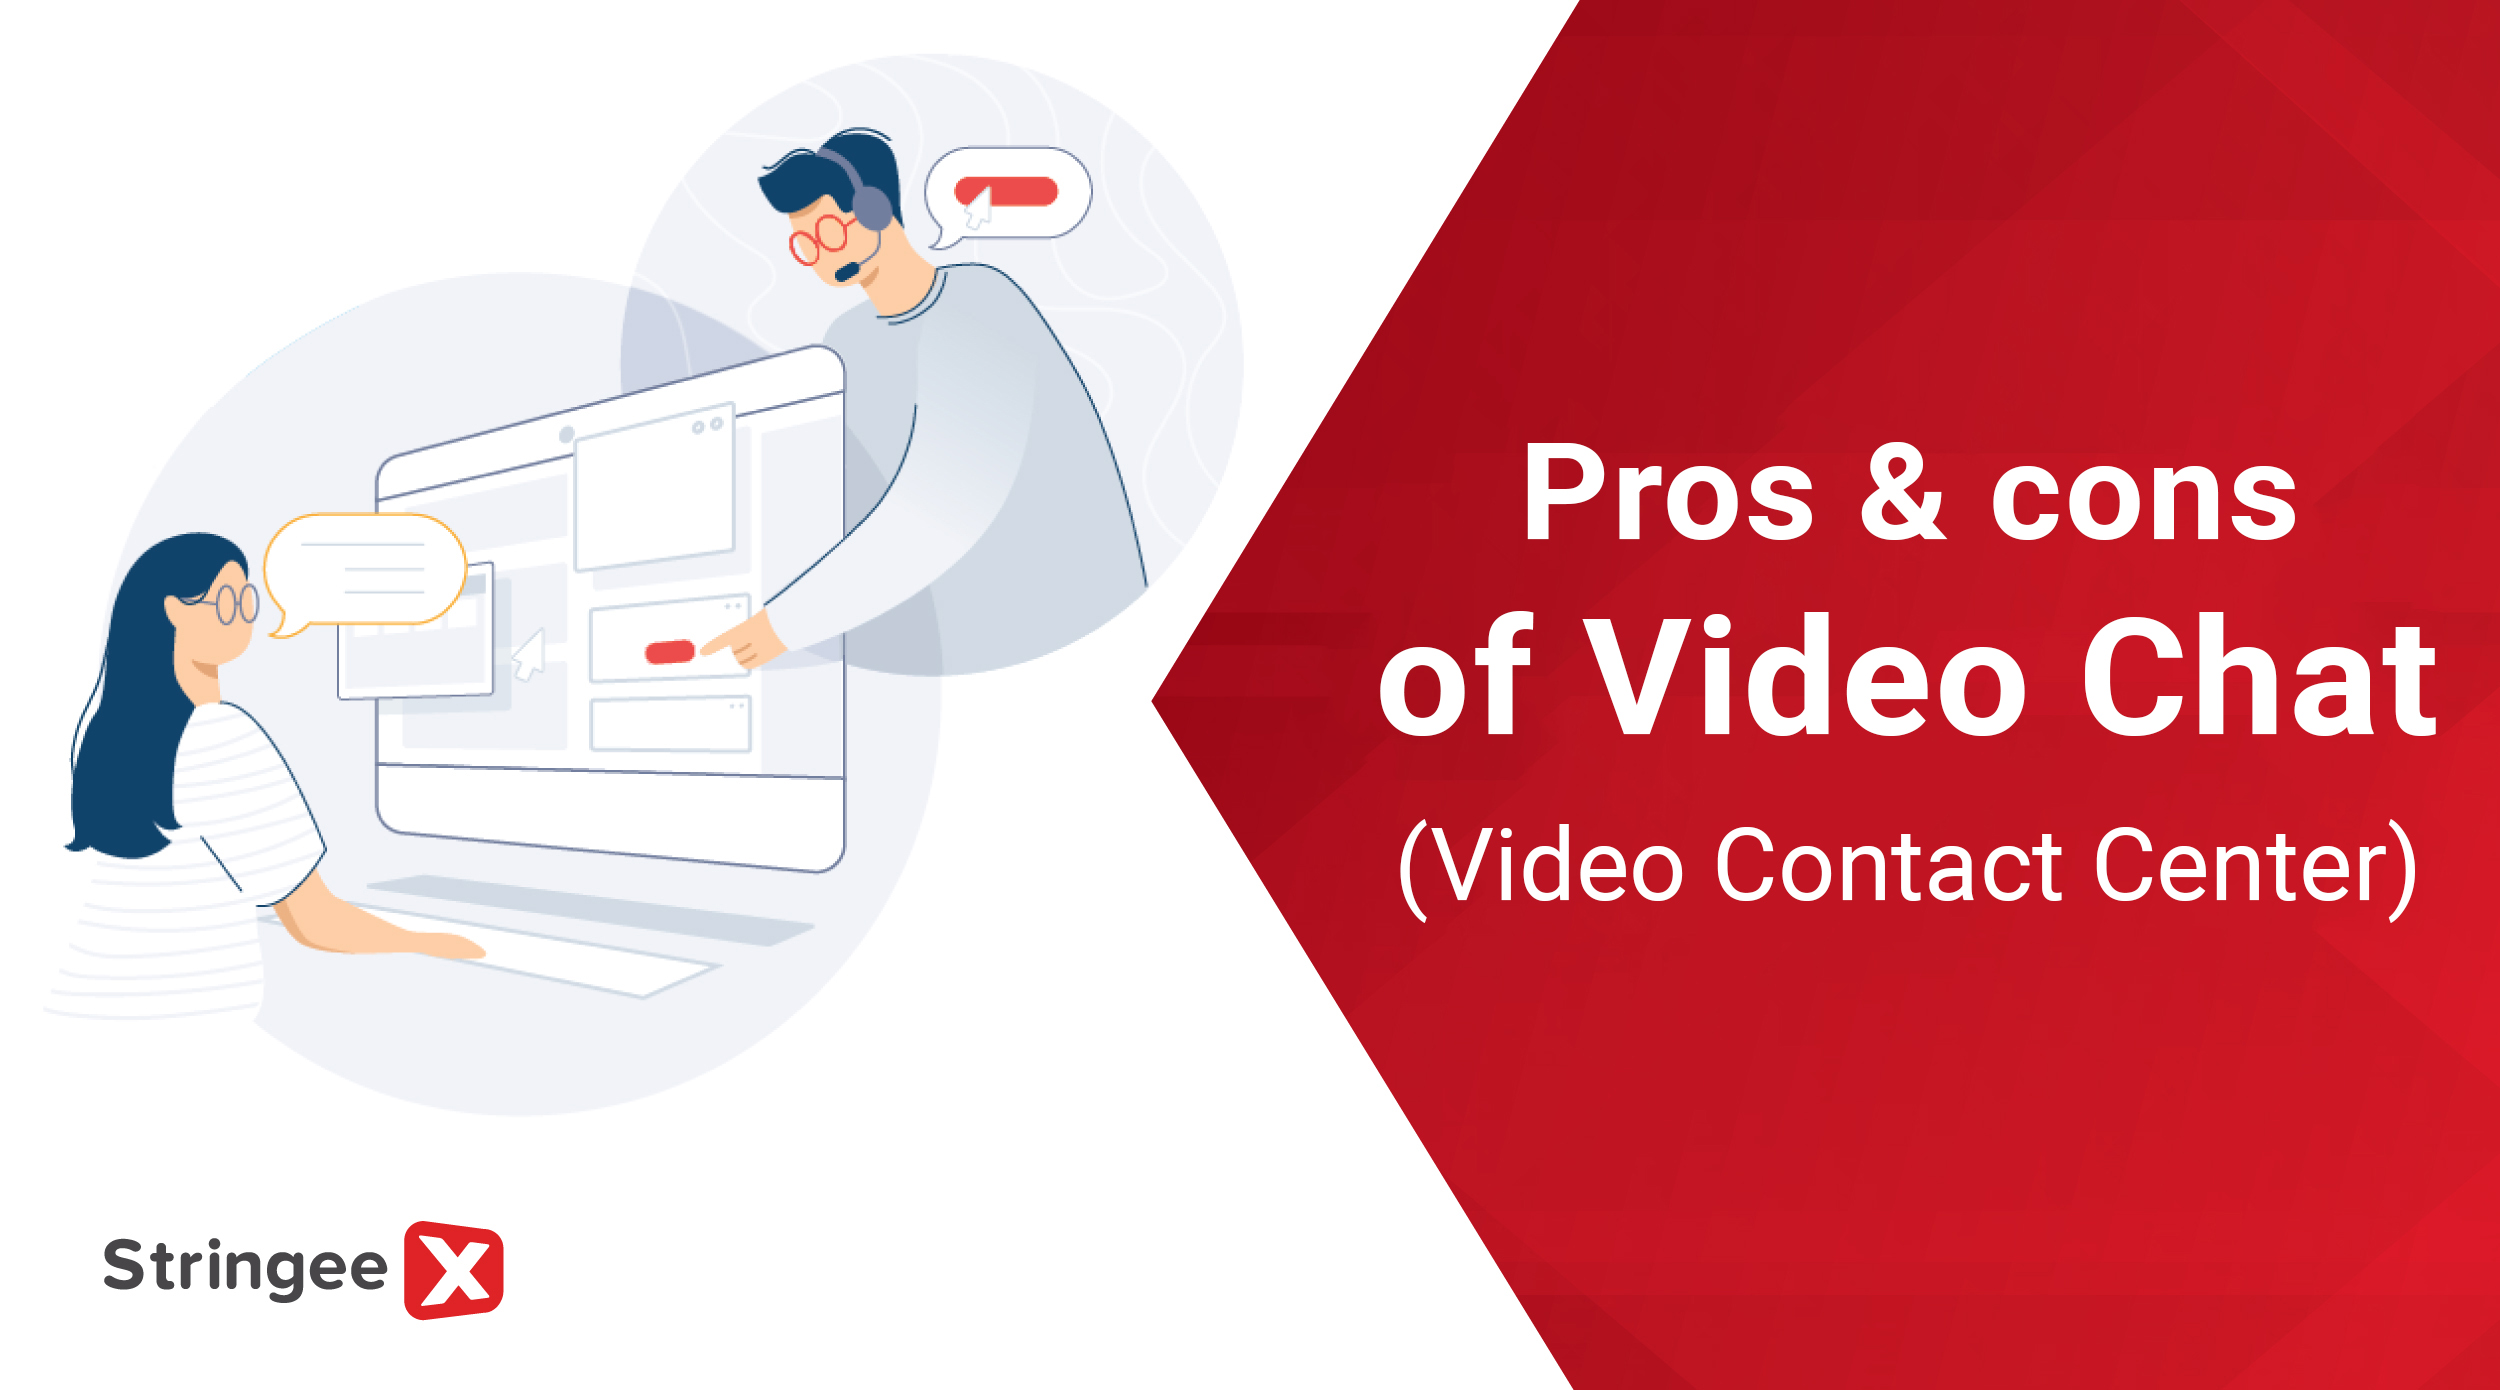 What are the pros and cons of Video Contact Center?